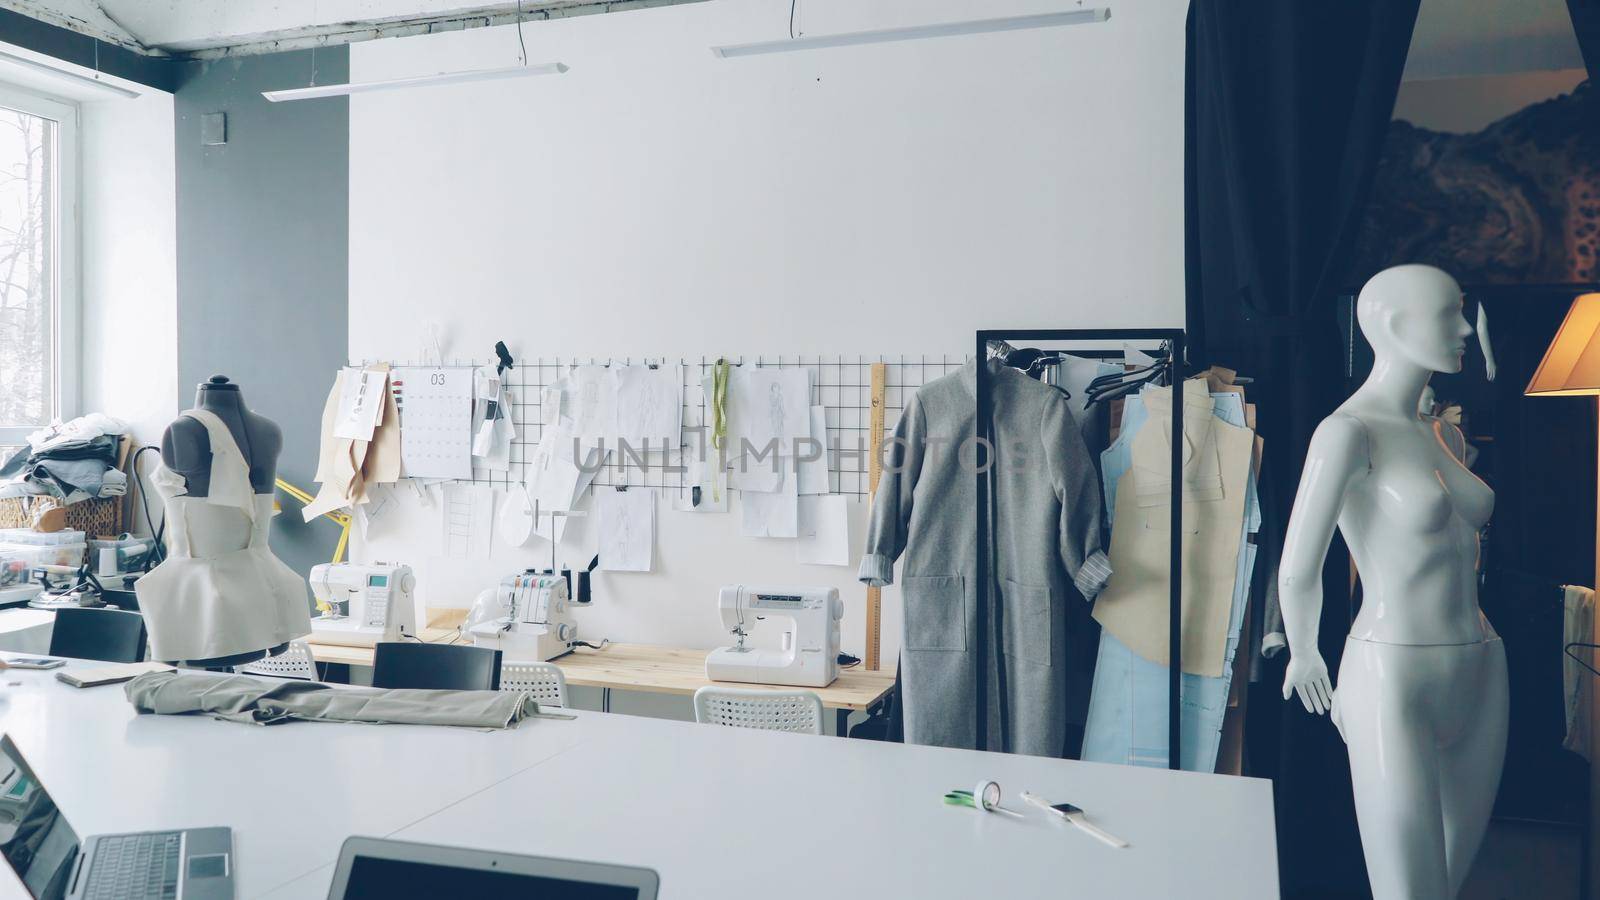 Light clothing design studio with large tailor's desk, mannequins, numerous sketches pinned on wall, sewing machines and half-finished garments on rails. by silverkblack